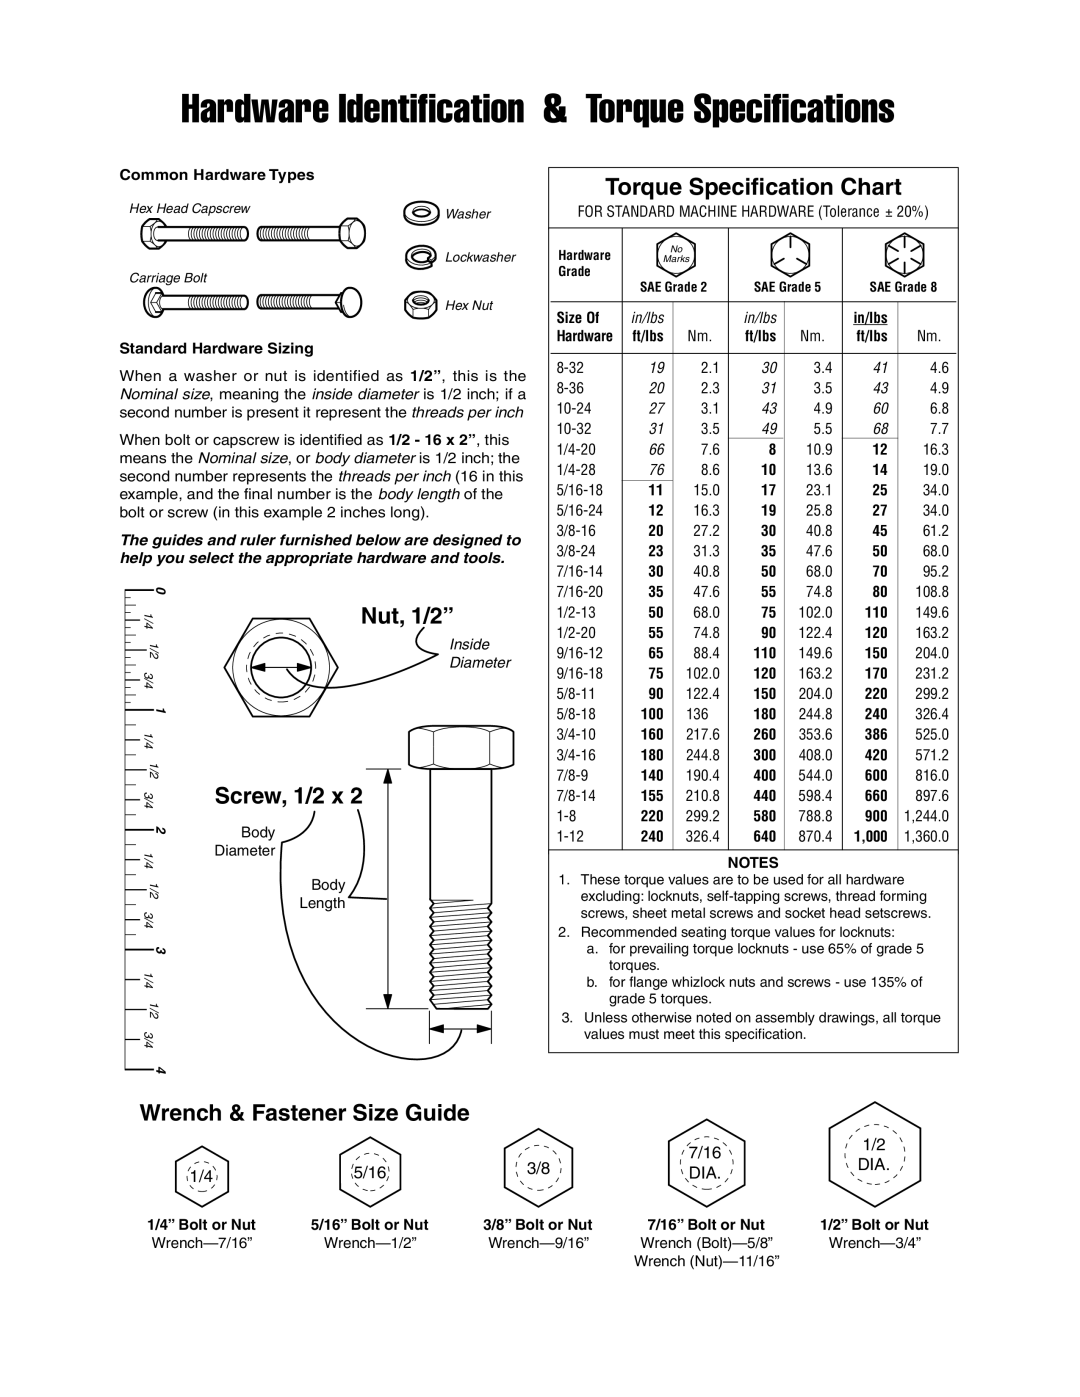 Snapper 1694401 Wrench & Fastener Size Guide, Hardware Identification & Torque Specifications, Torque Specification Chart 